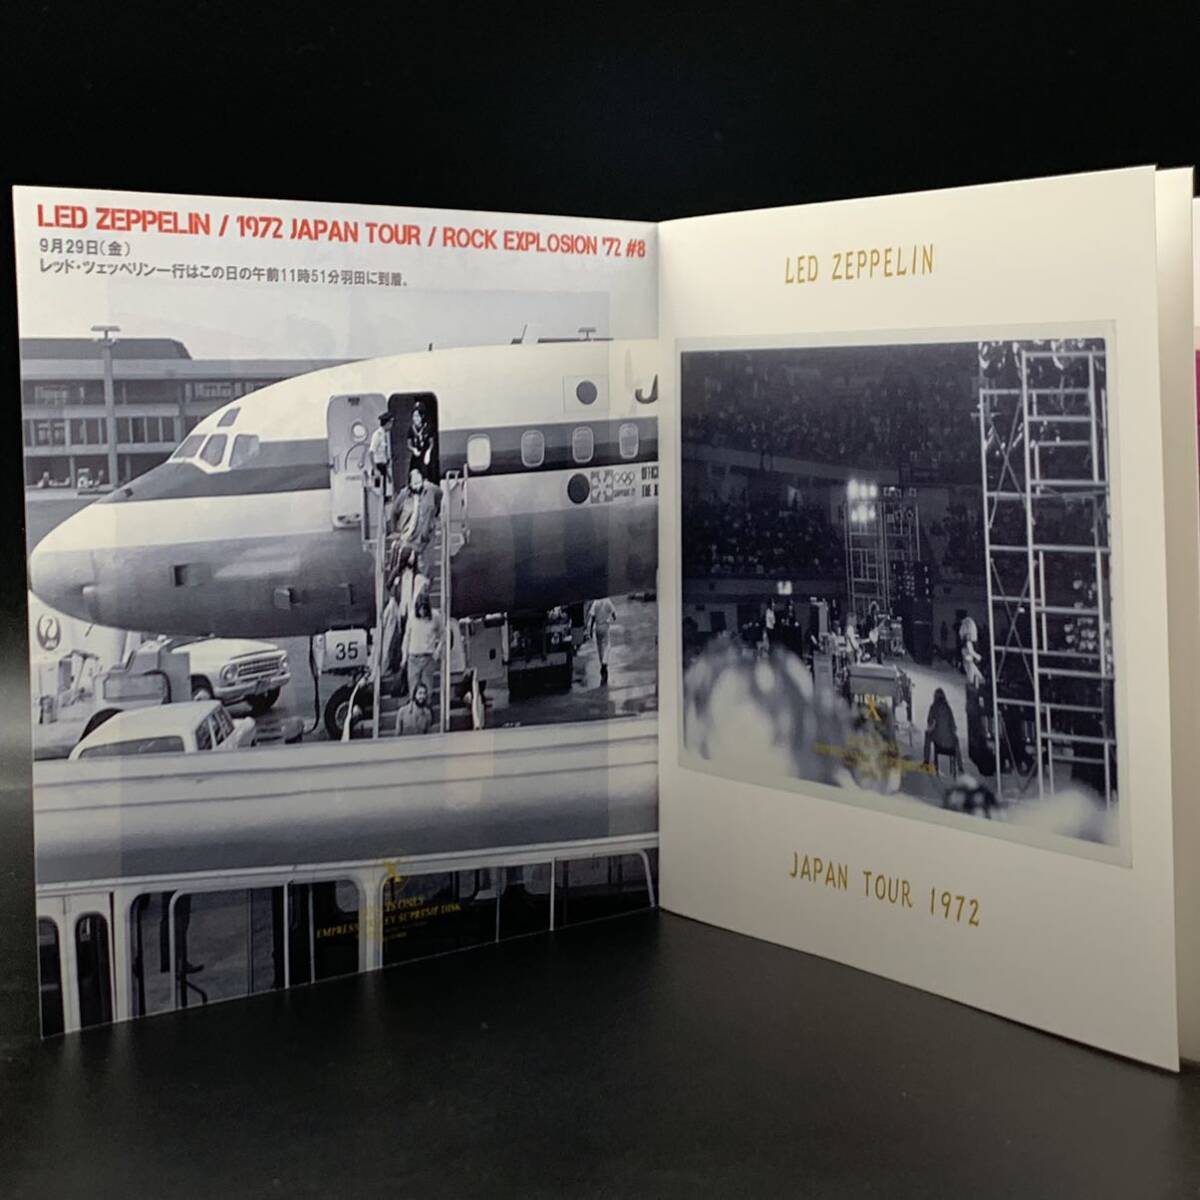 LED ZEPPELIN / JET STREAM - Pro Use Only 4CD Box with Booklet Set : Super Rare!! Hard to Find!! For enthusiastic collector only!!_画像5